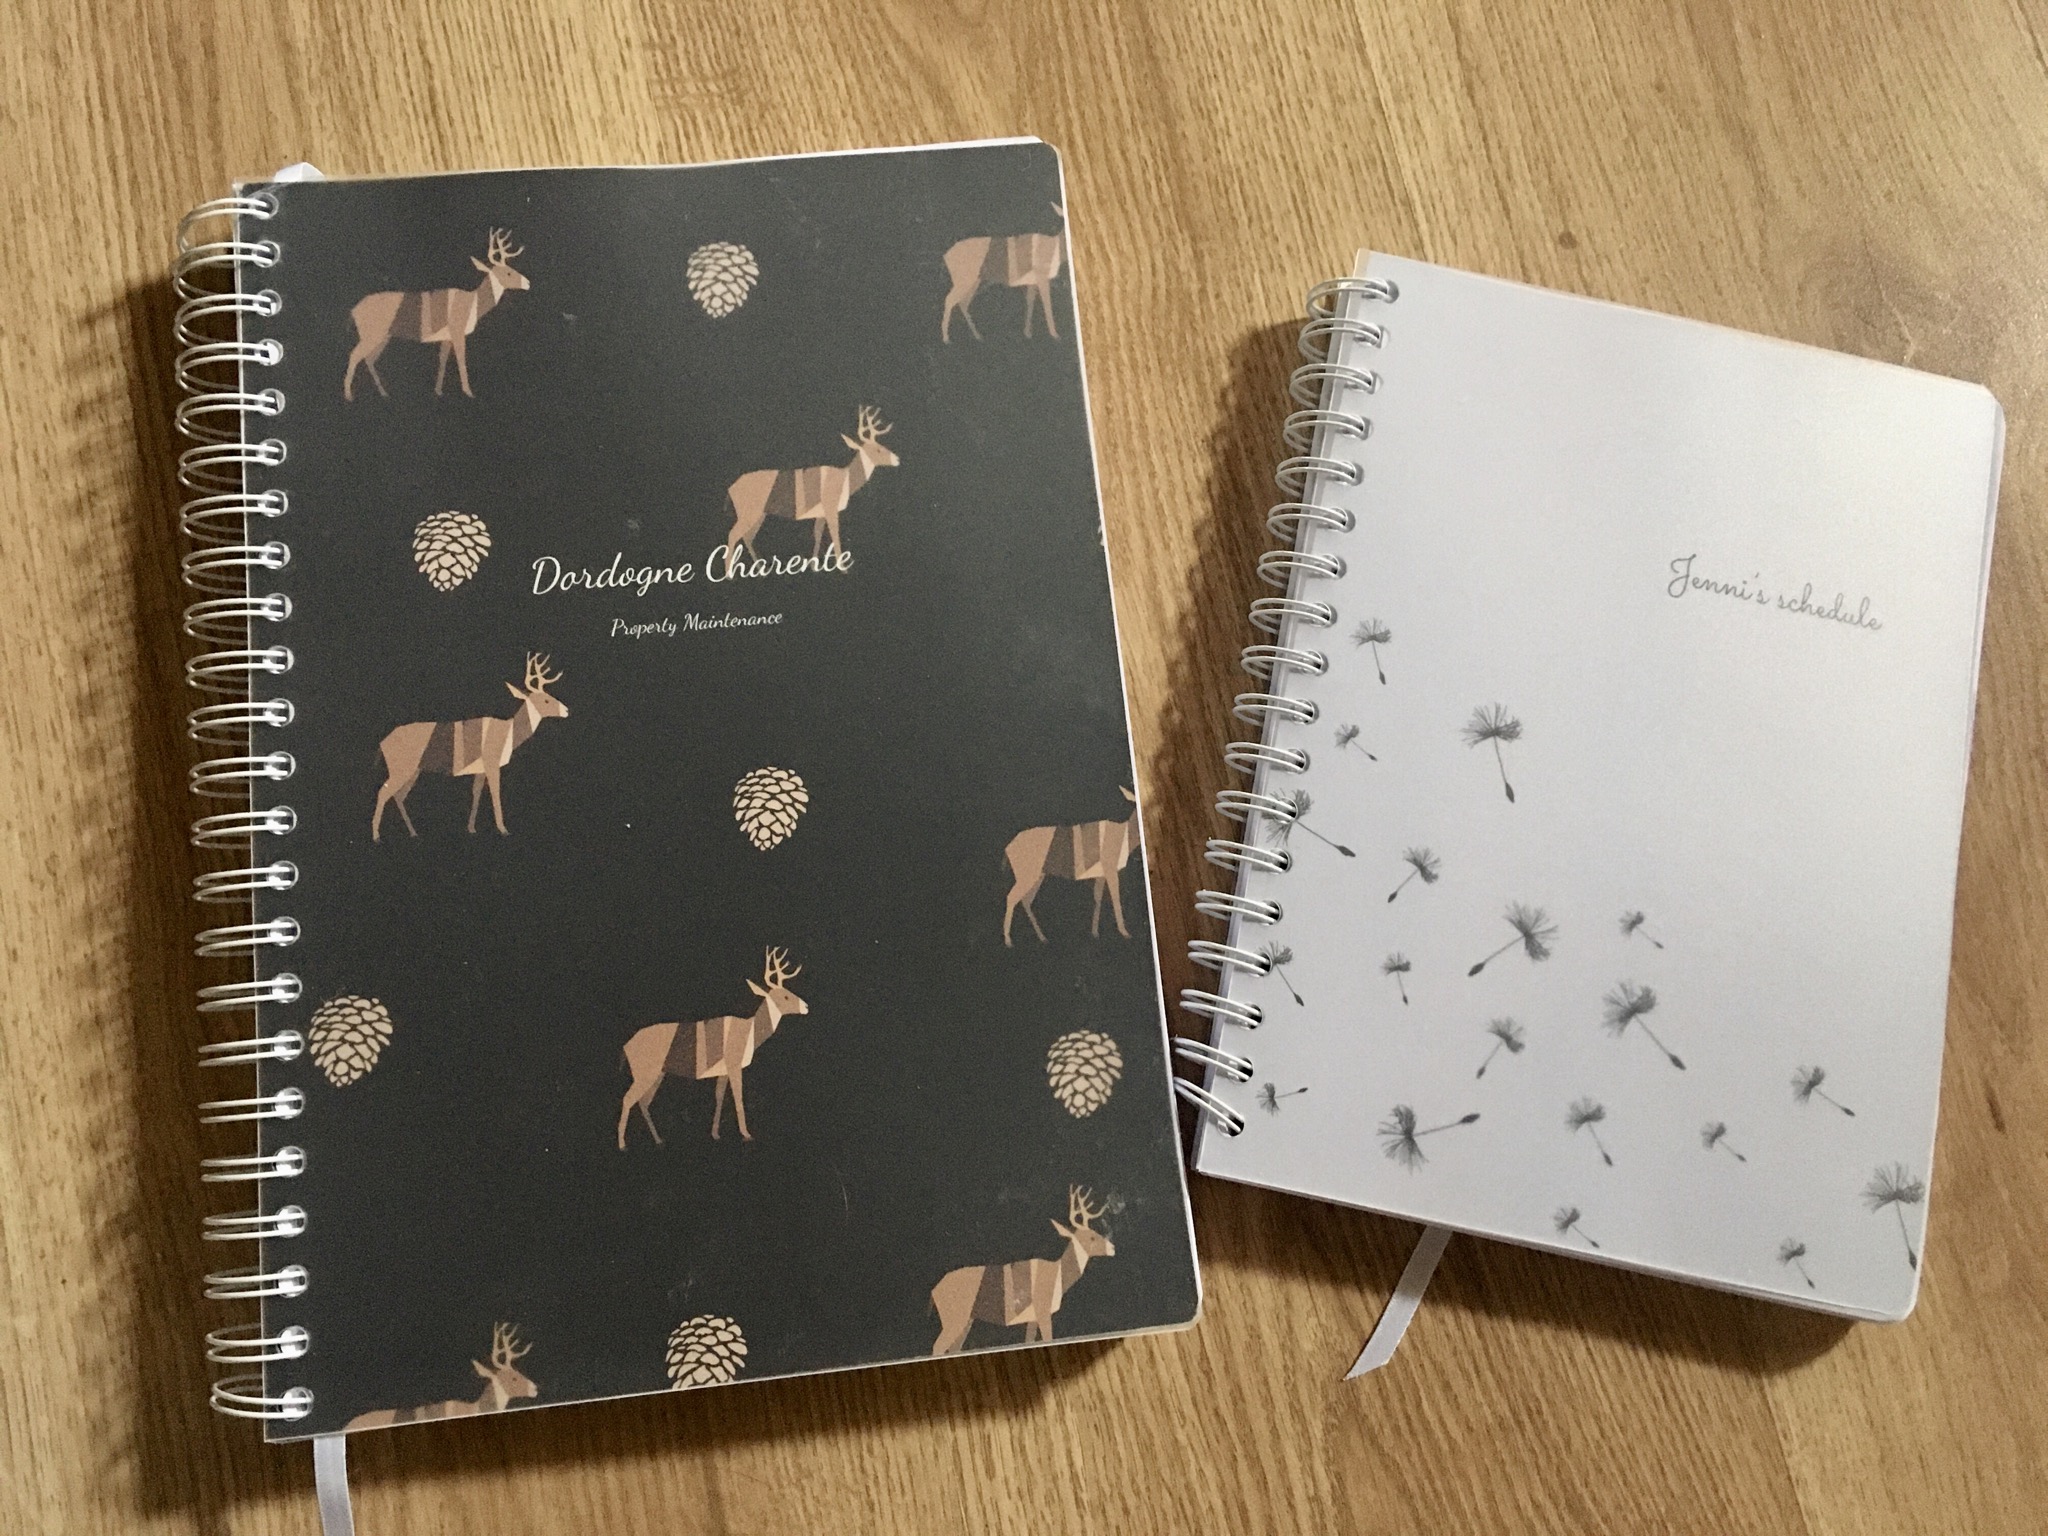 2 diaries from Toad Diaries. One is white with dandelions on and smaller than the A4 one next to it which is black with deer on